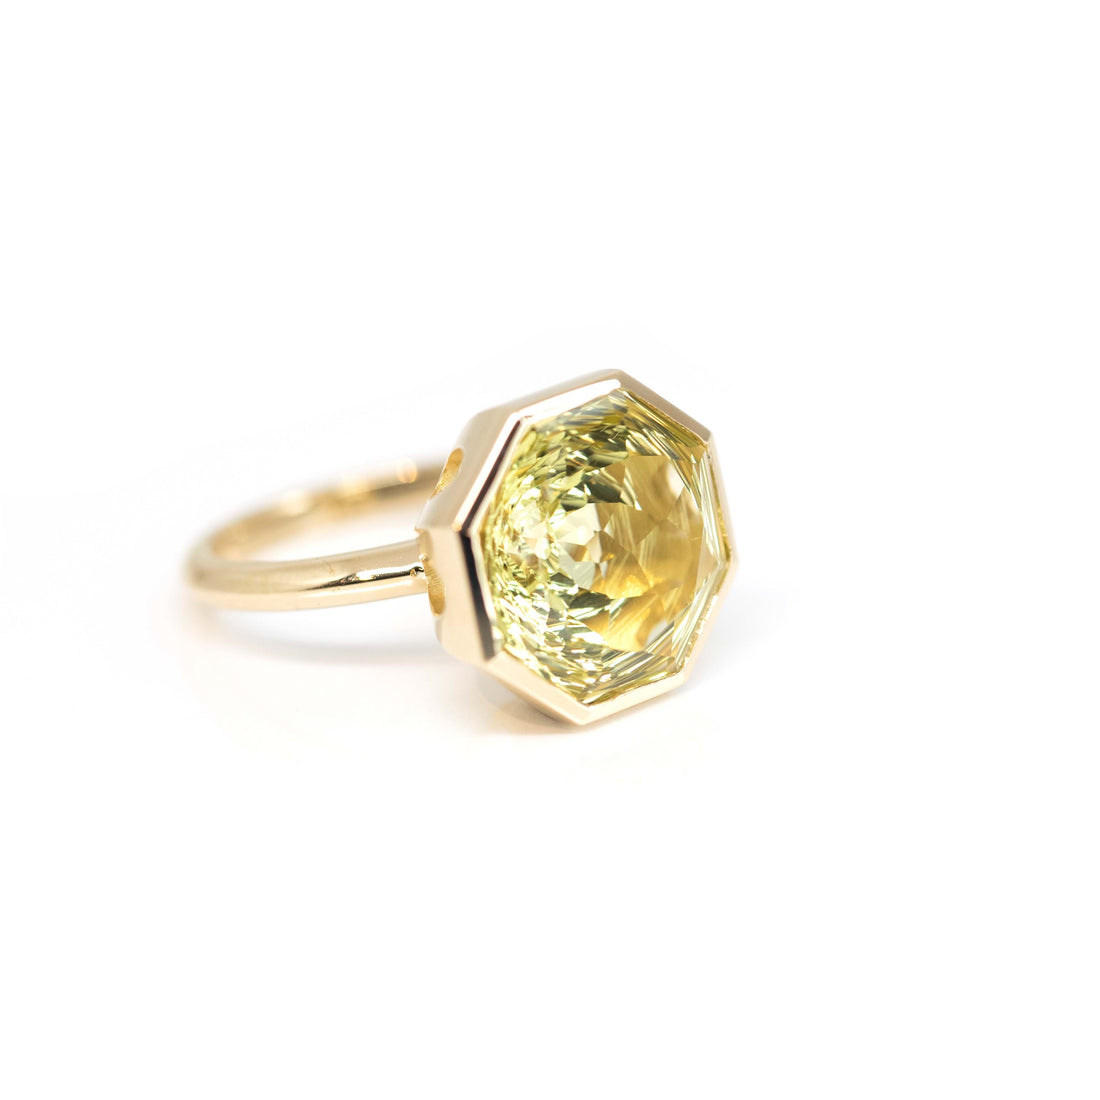 side view of custom made lemon quartz statement designer ring made by bena jewelry on a white backgroubd